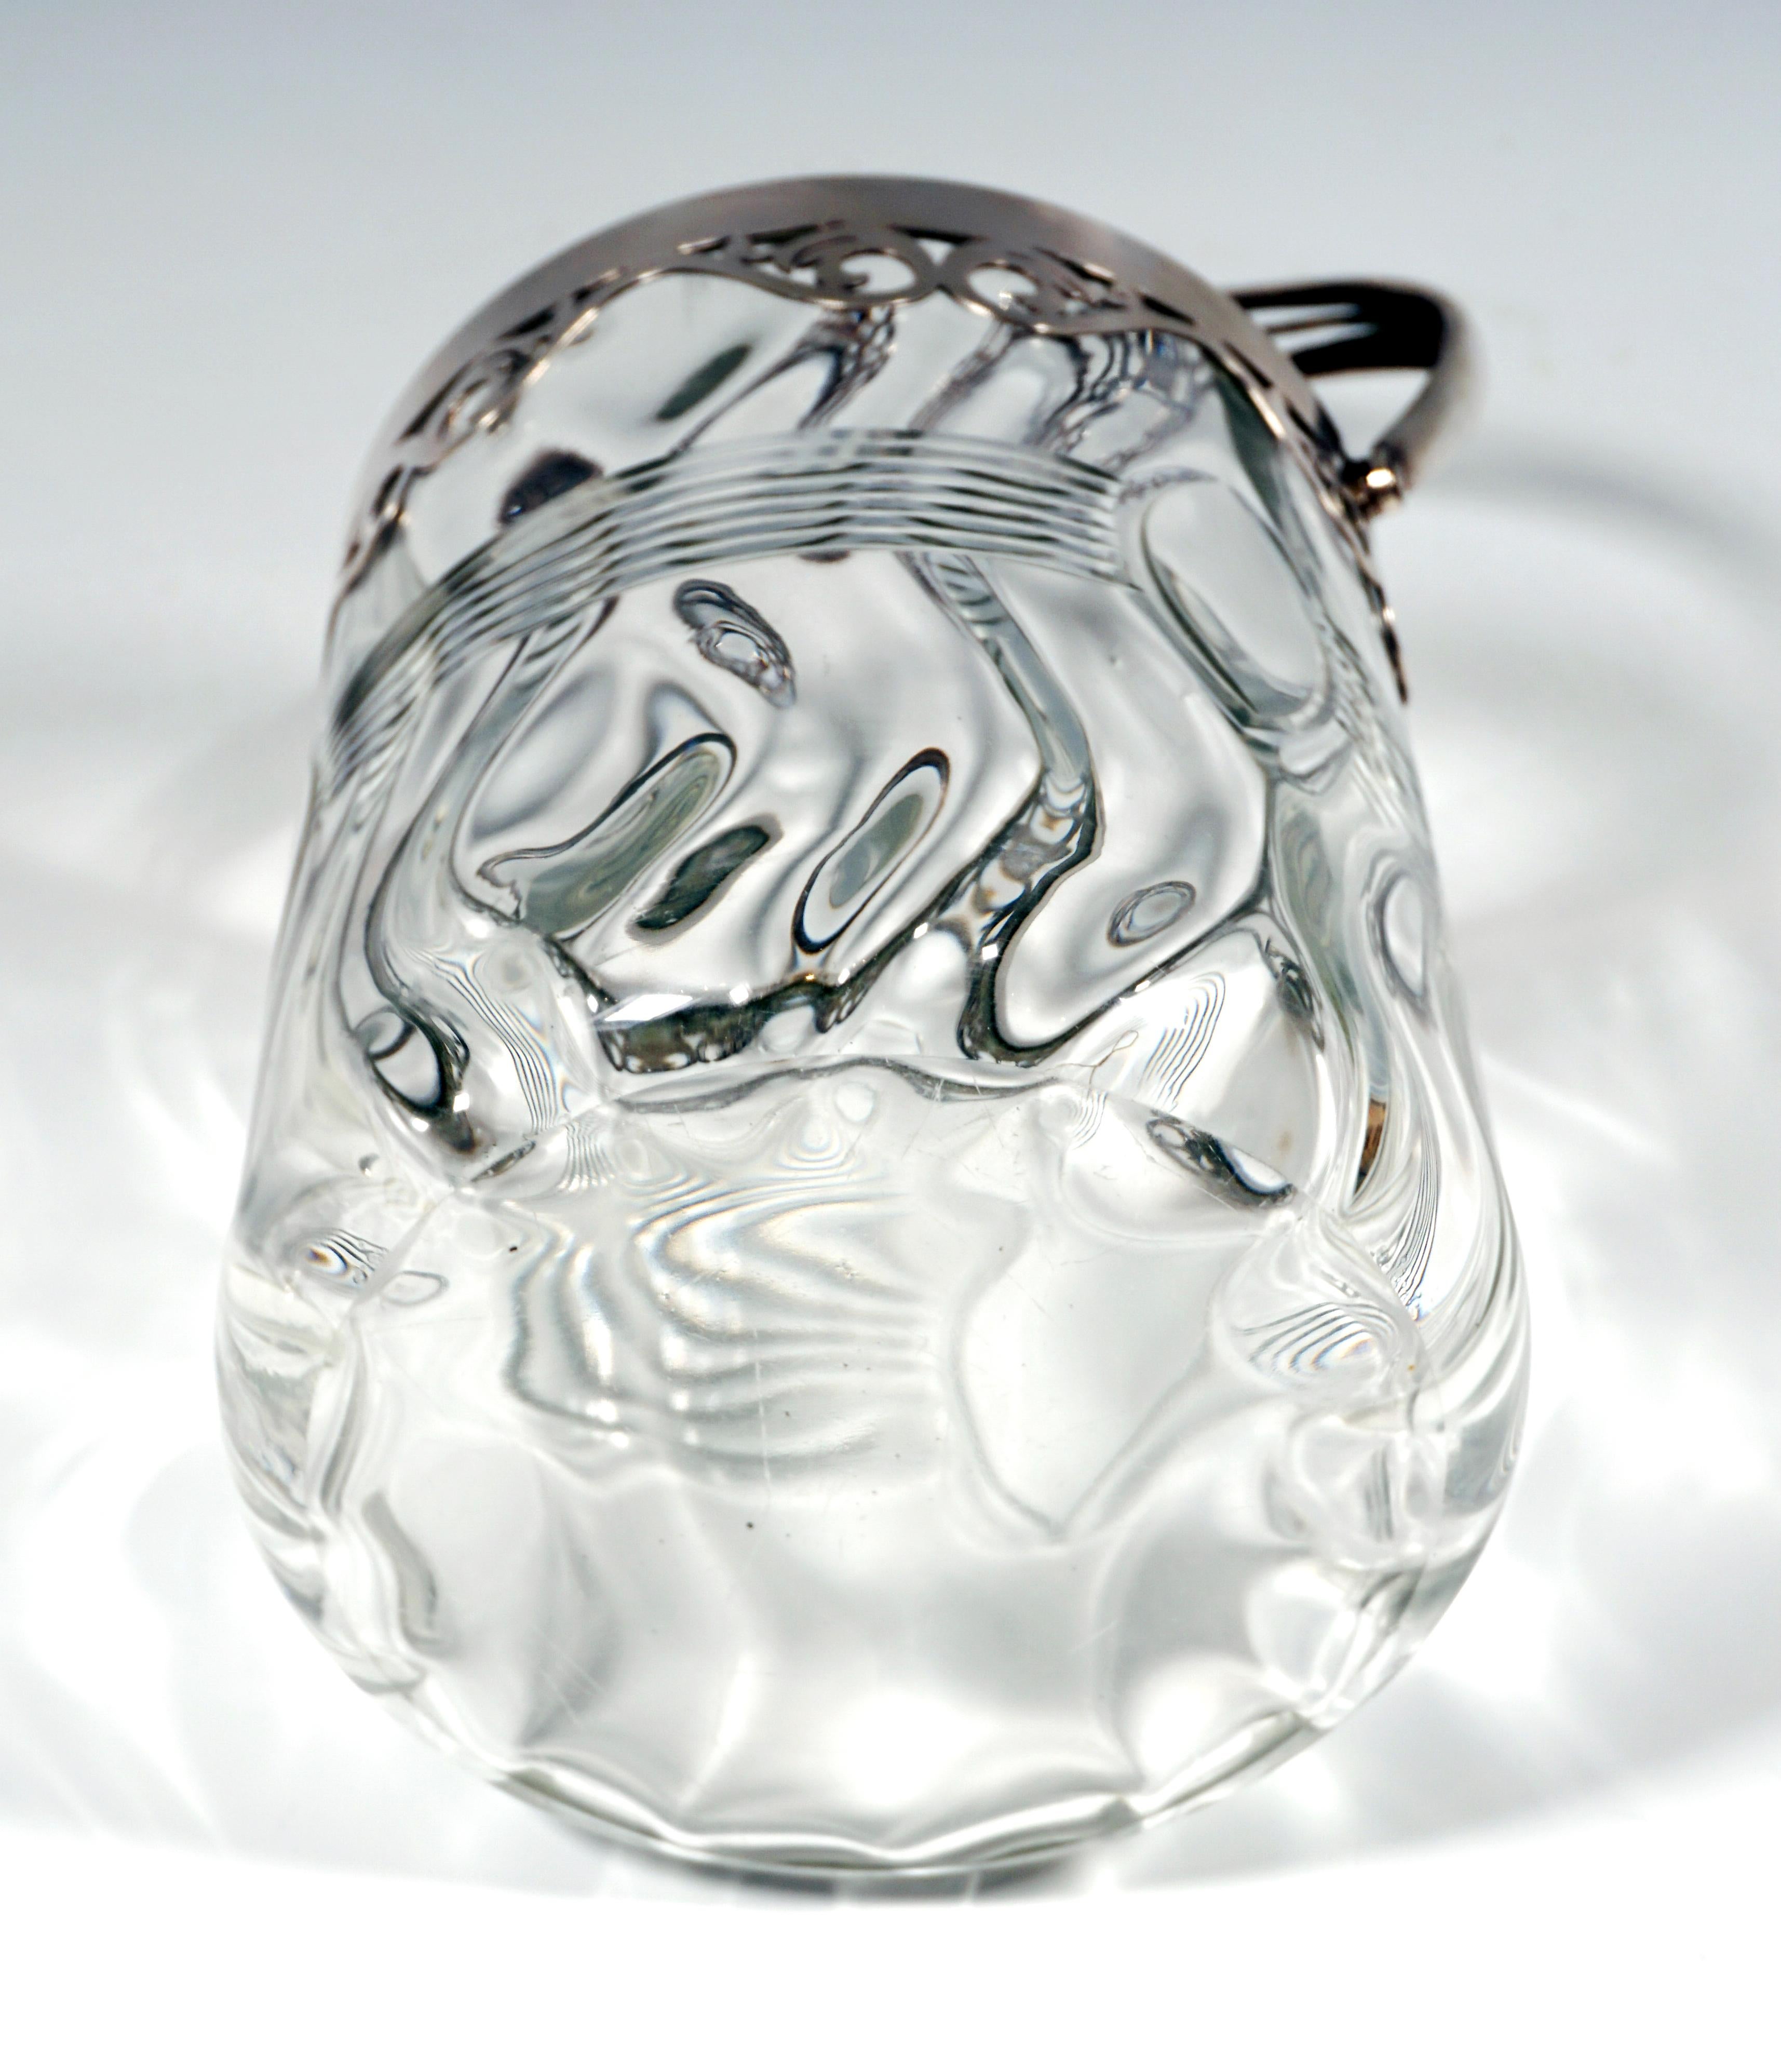 Hand-Crafted Art Deco Glass Ice Bucket with Silver Mount, Kattner & Co Vienna, around 1925 For Sale